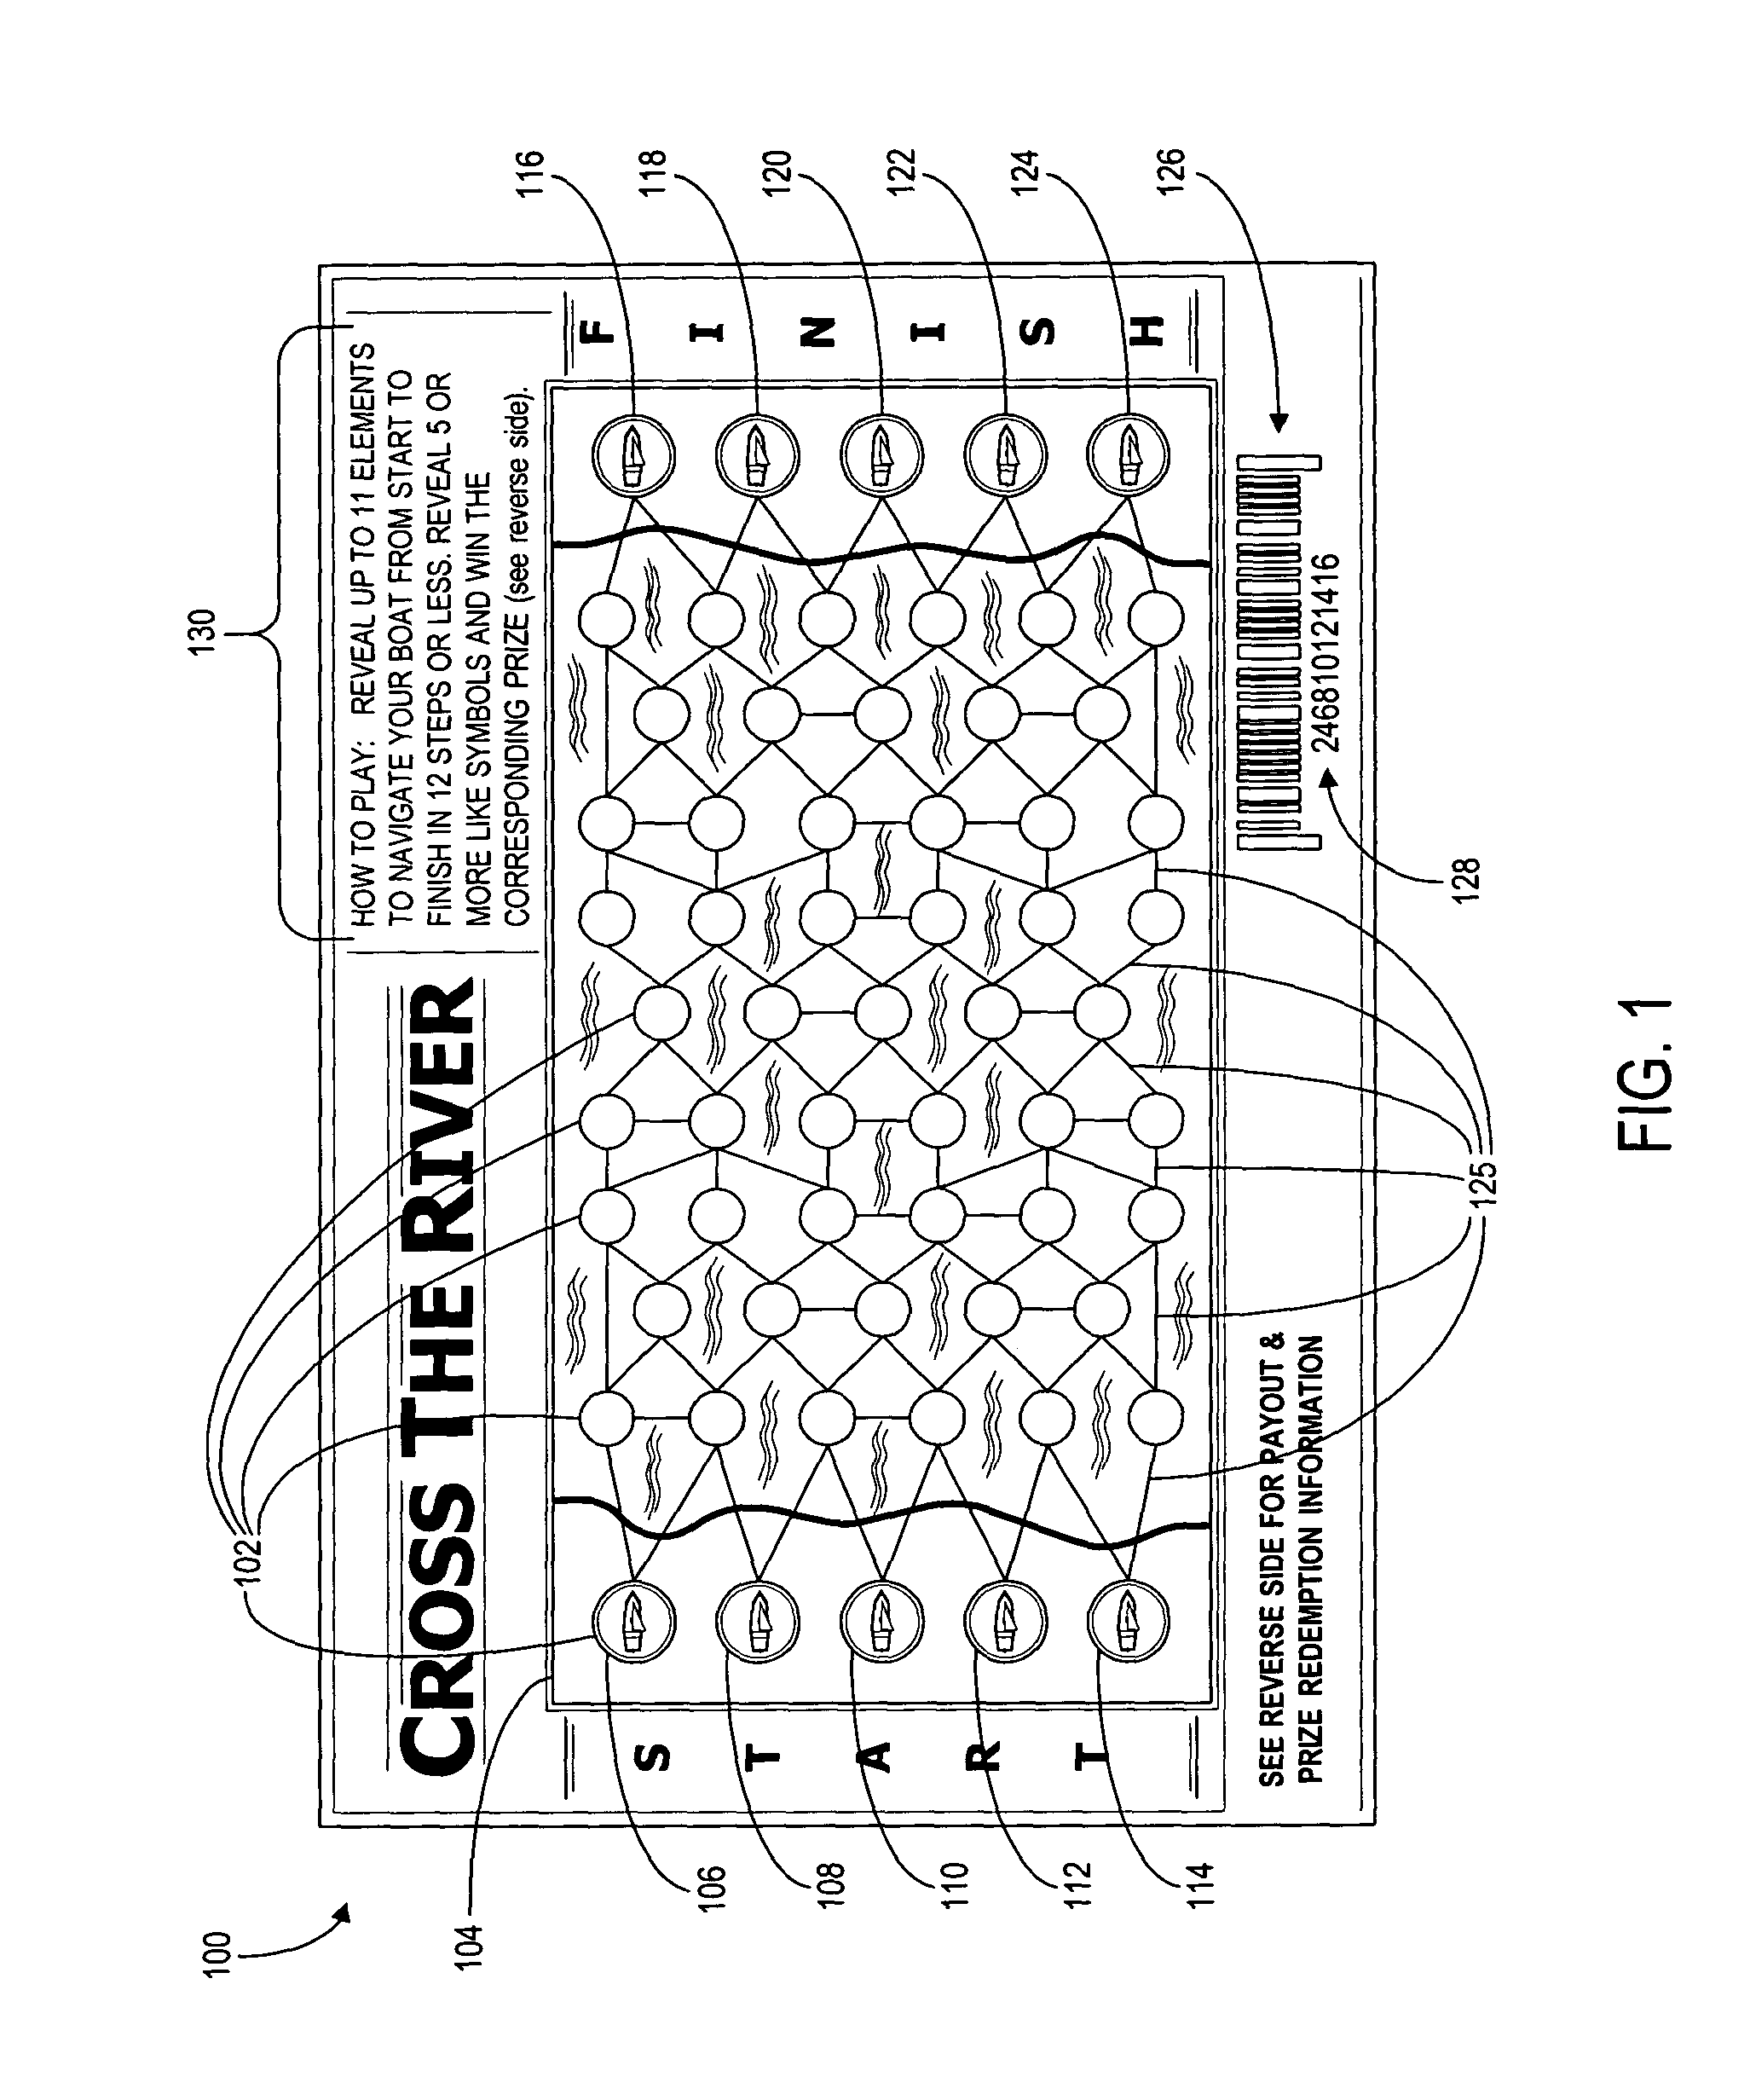 Lottery game card and method for conducting a lottery game